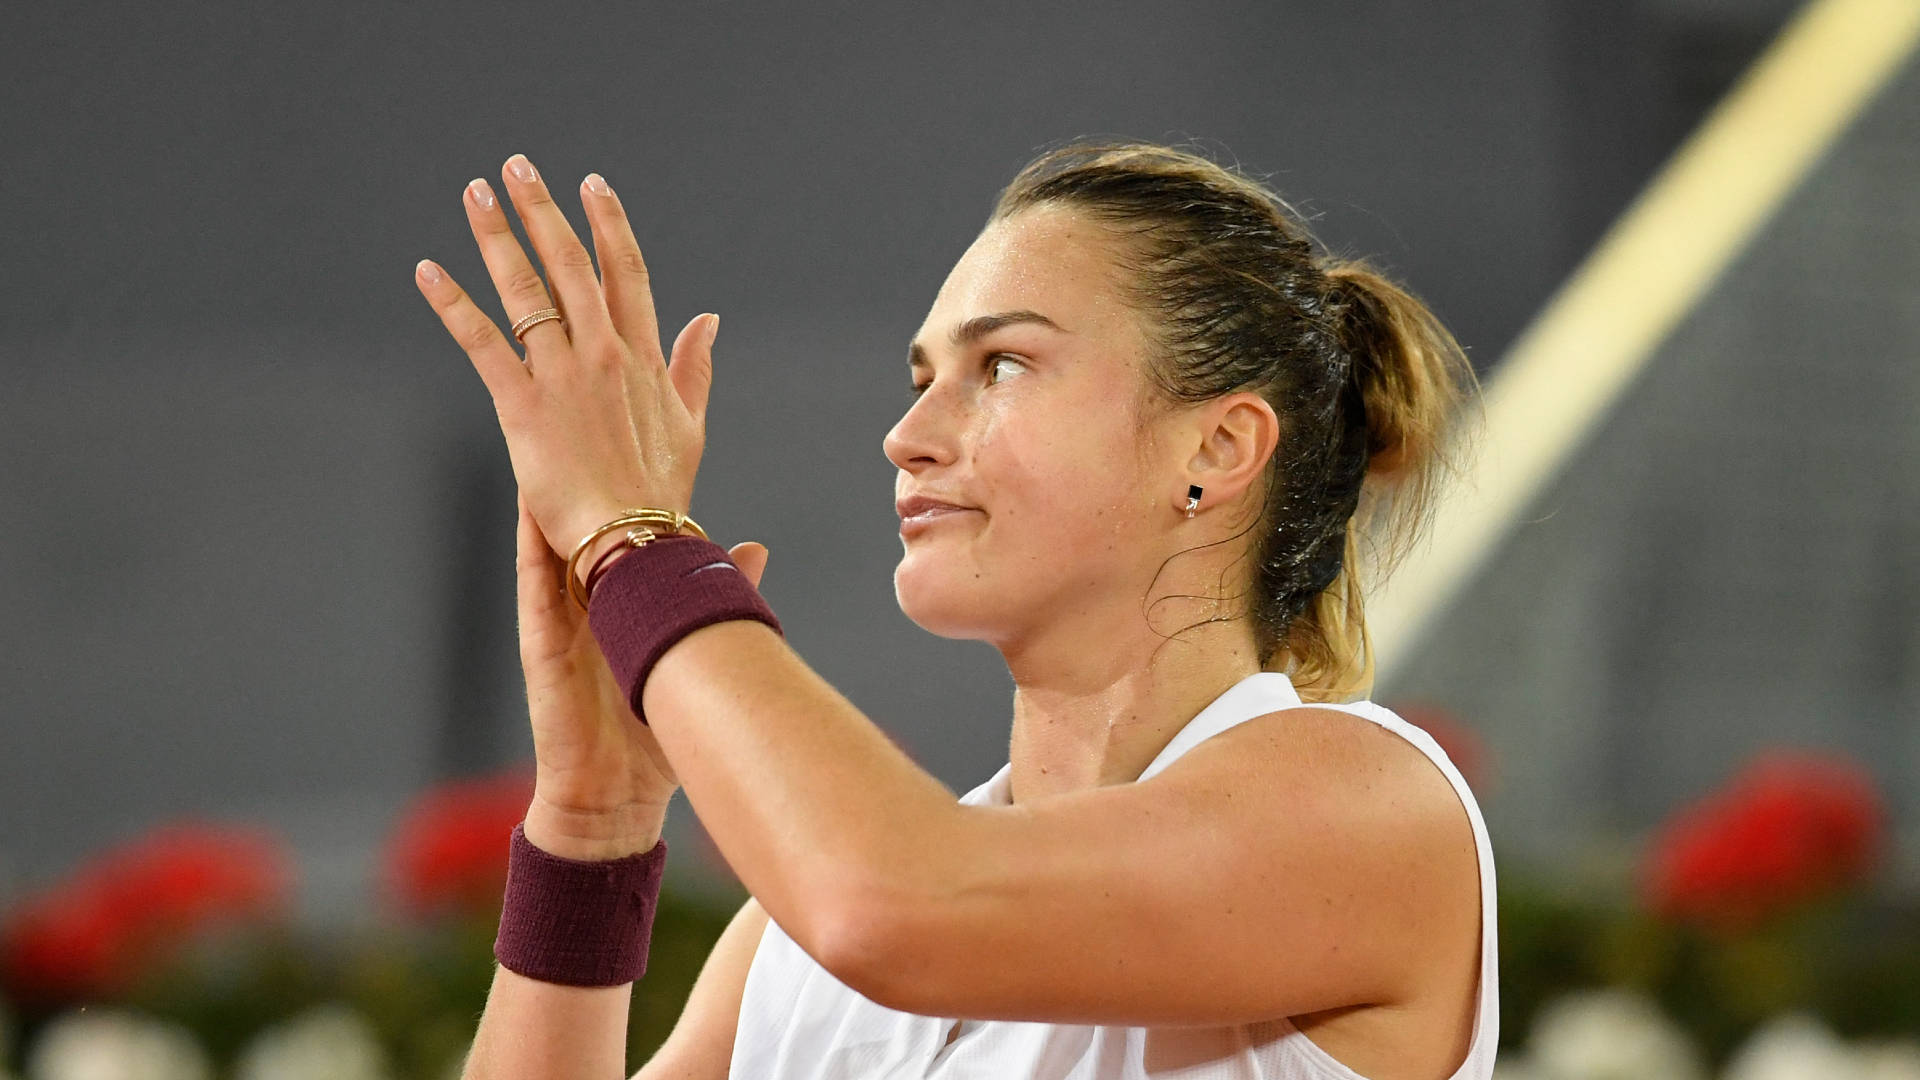 Aryna Sabalenka Appreciating Her Opponent with Applause. Wallpaper